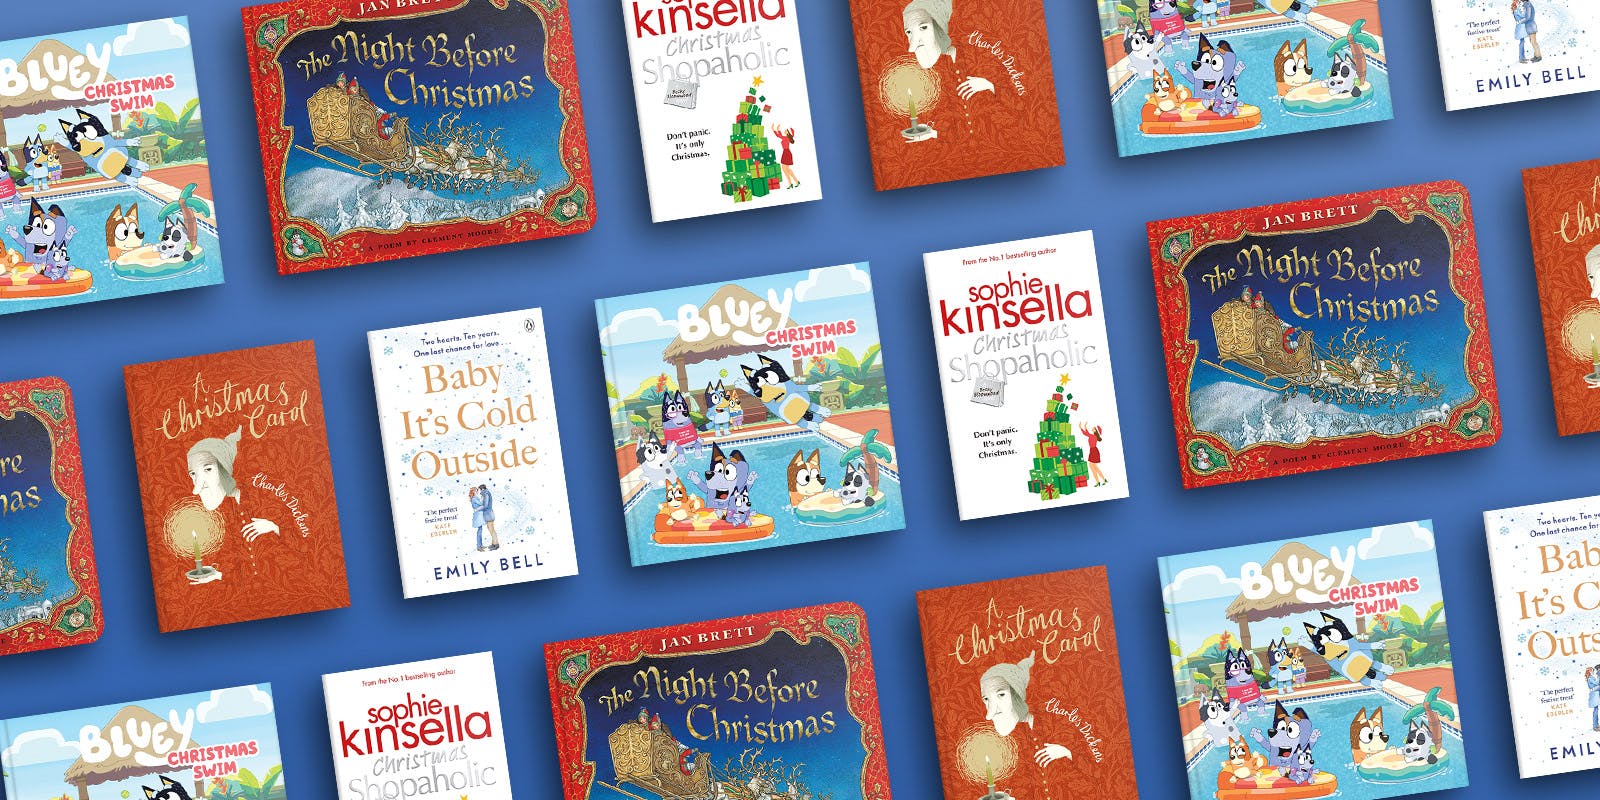 5 Christmas tales to get you in a festive mood